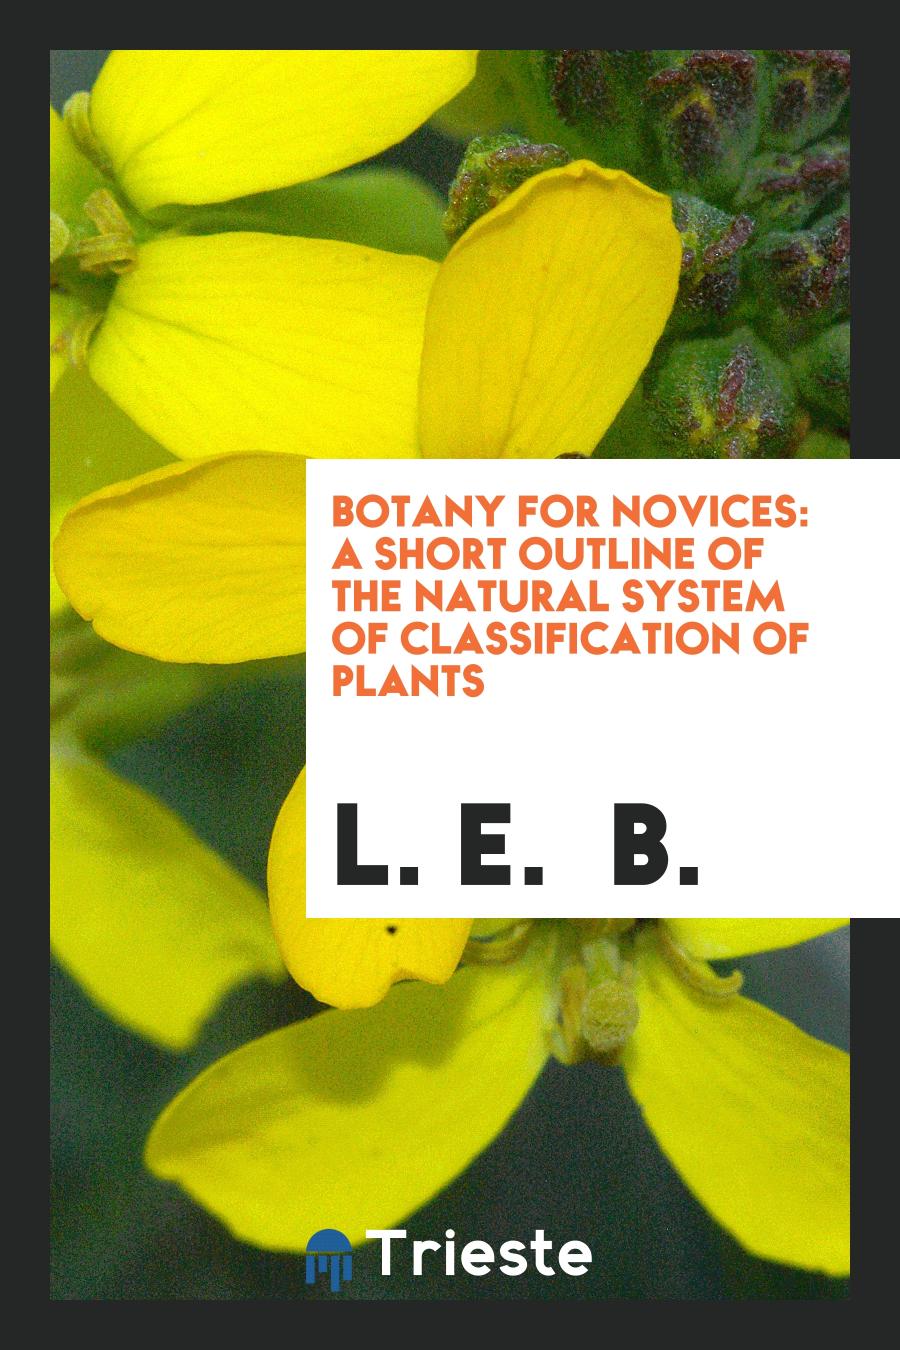 Botany for novices: A short outline of The Natural System of Classification of plants